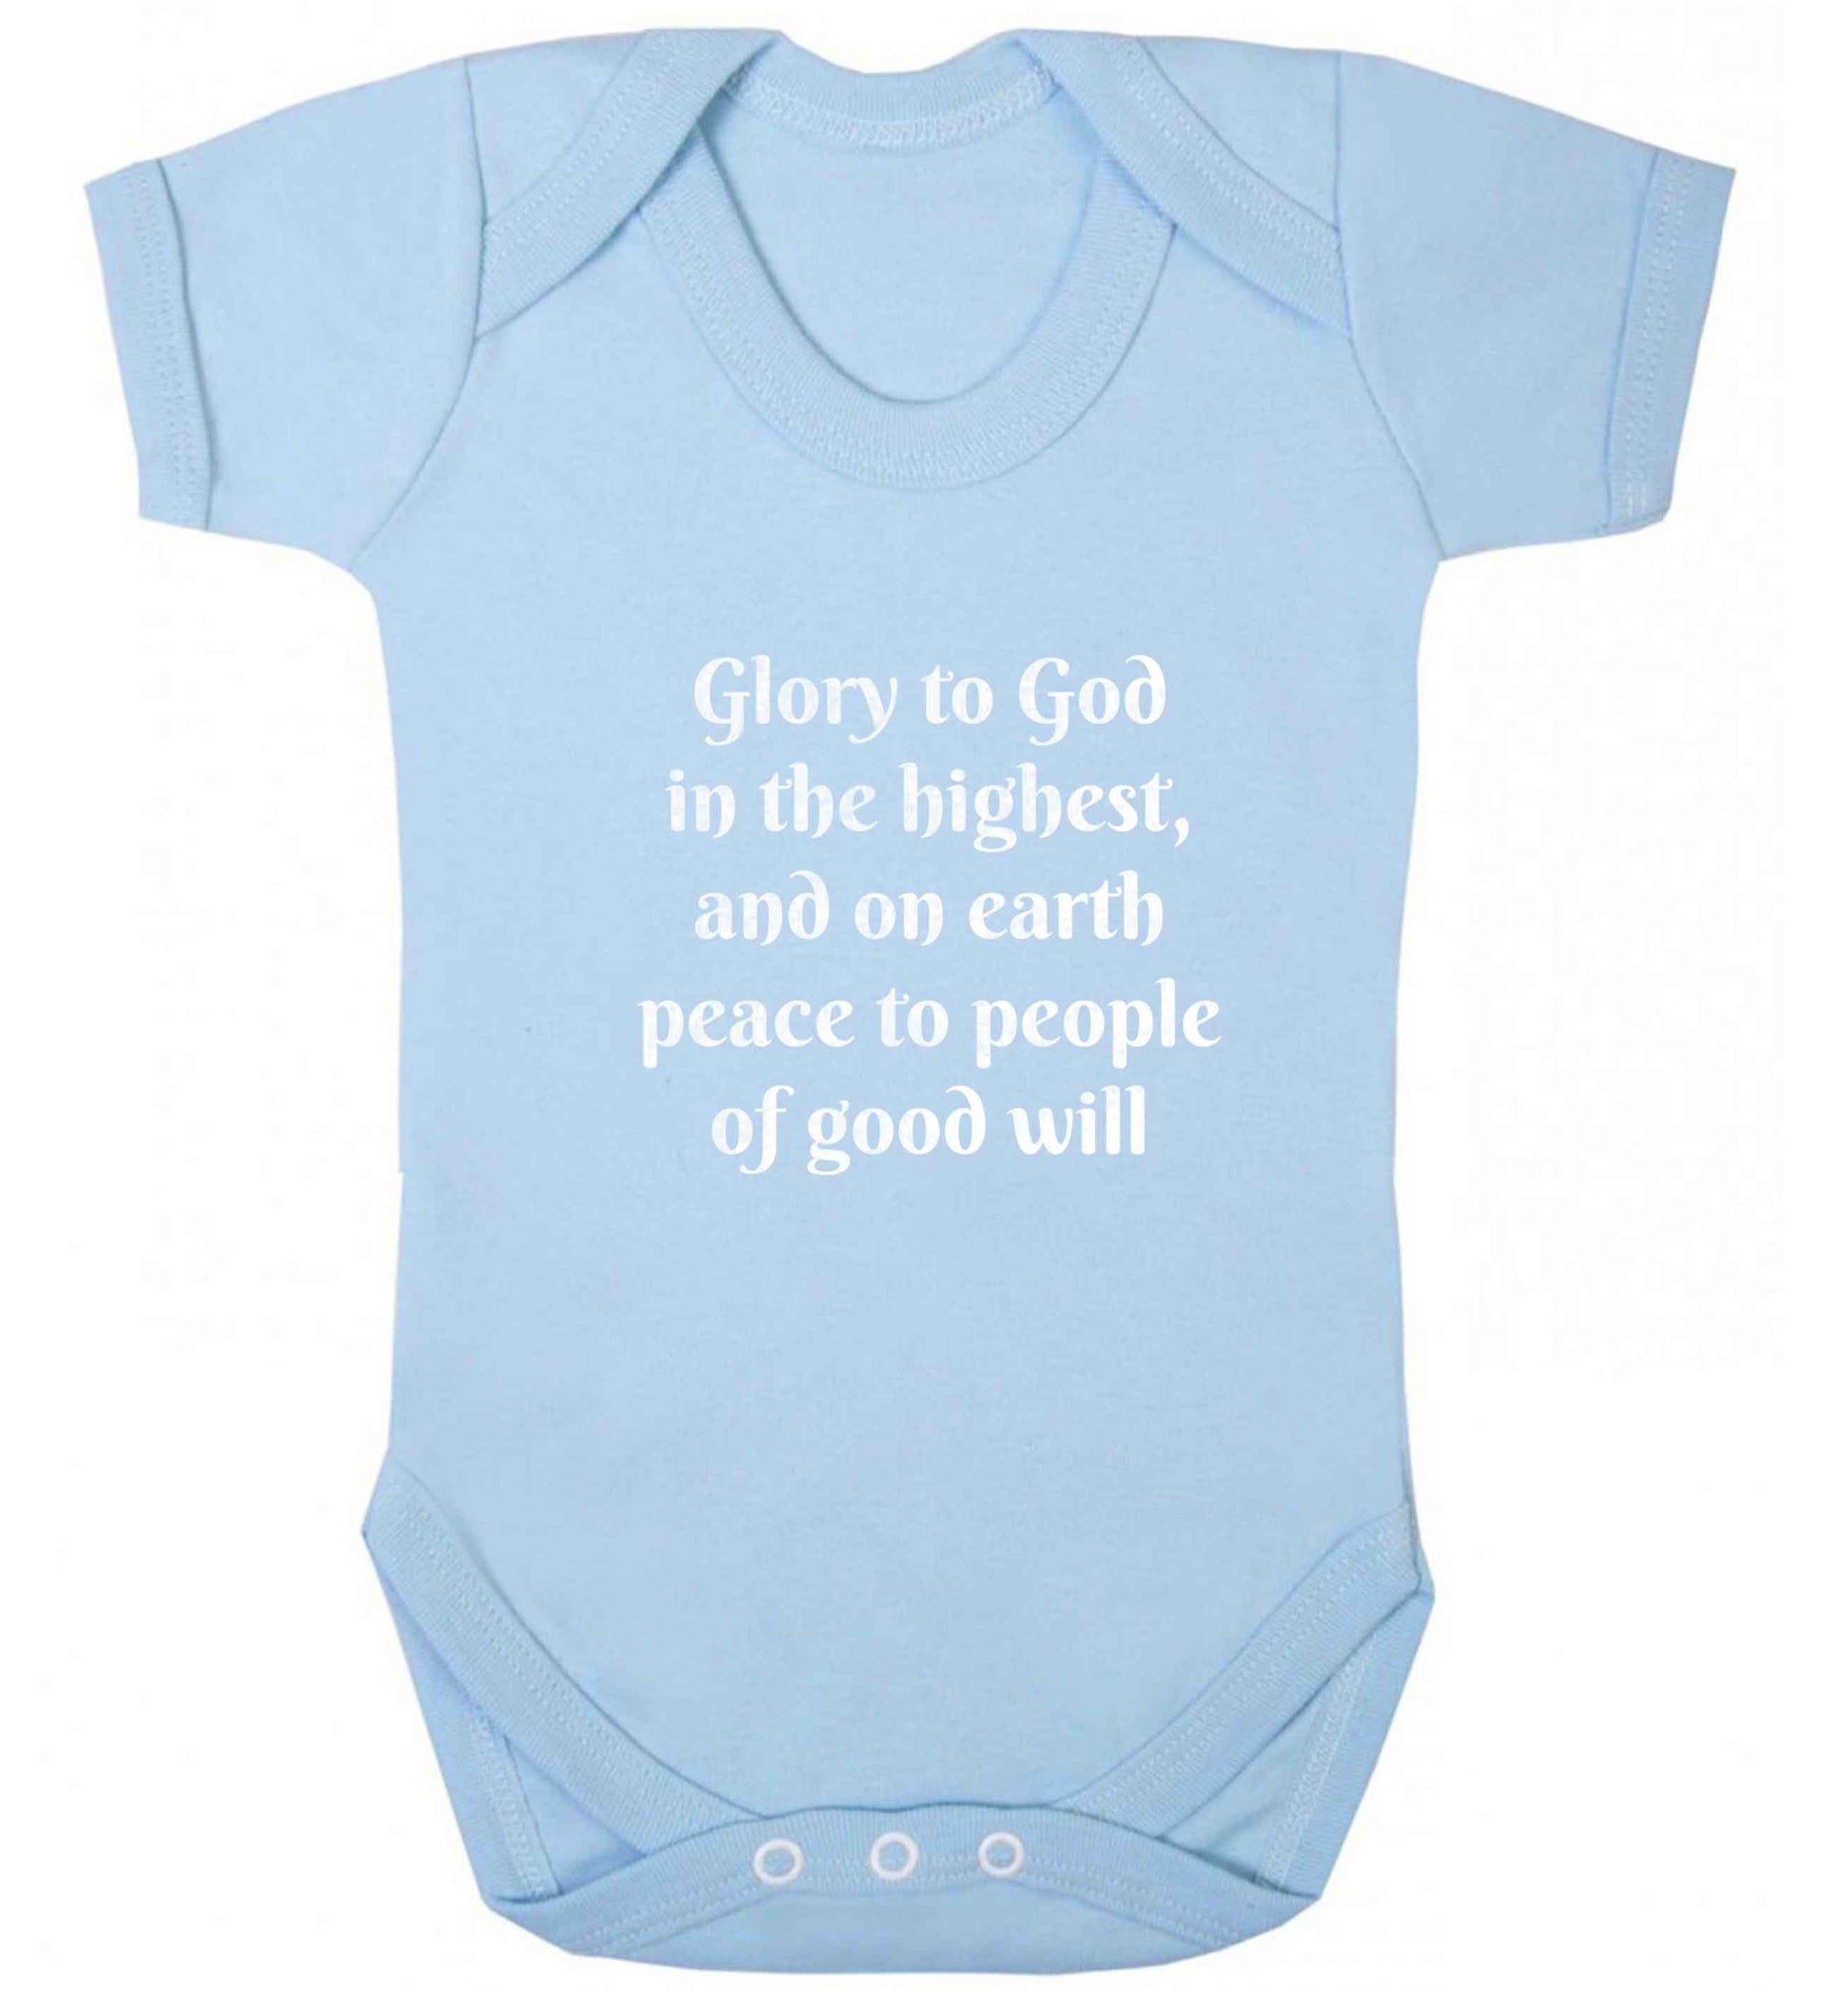 Glory to God in the highest, and on earth peace to people of good will baby vest pale blue 18-24 months